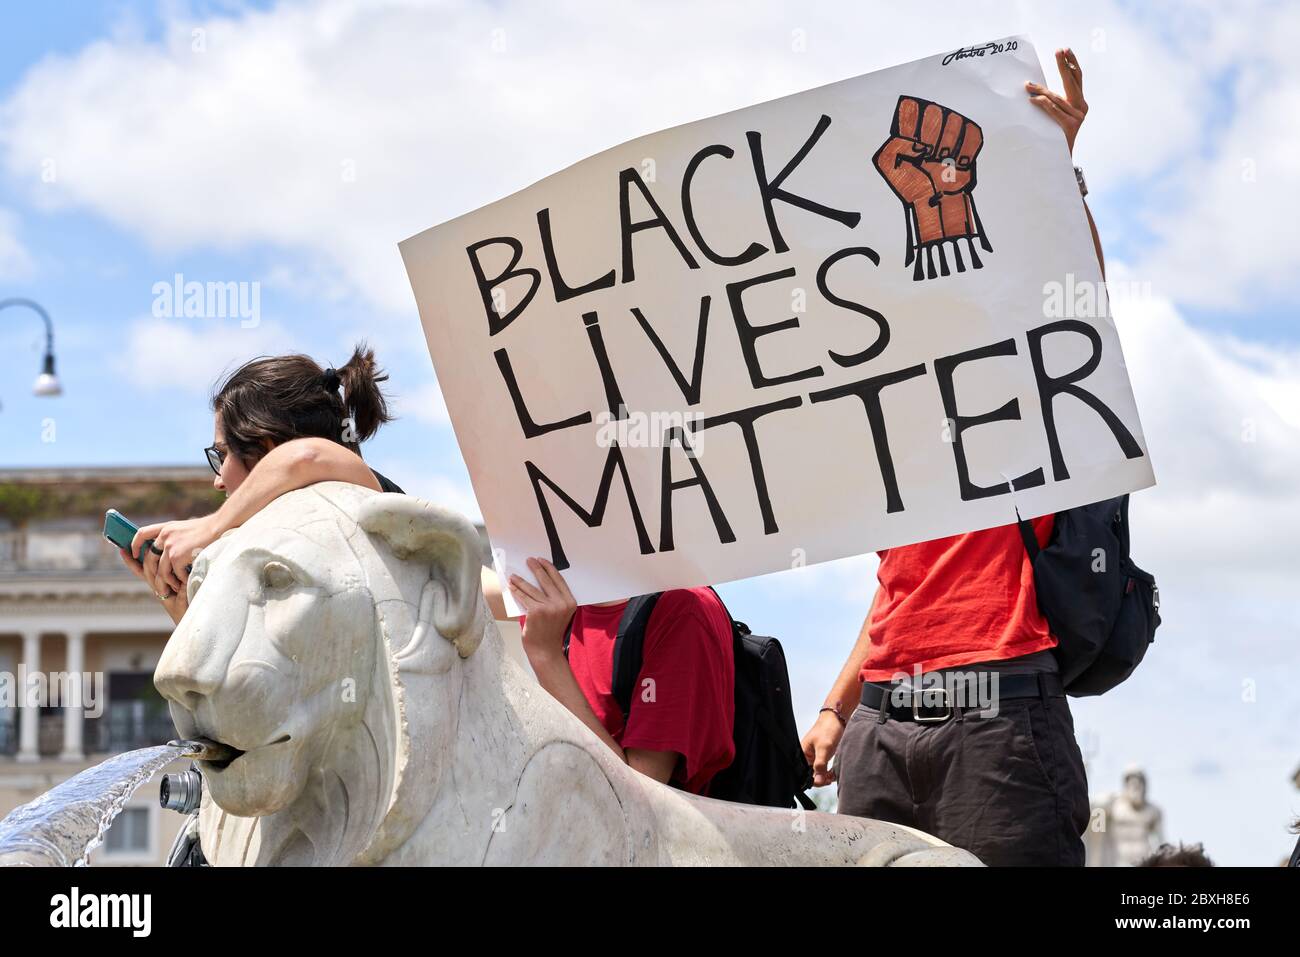 Black Lives Matter, Protest for George Floyd Against Racism. Strong Message on Sign: Black Lives Matter, Raised Fist. Lion-Shaped Fountain with Water Stock Photo